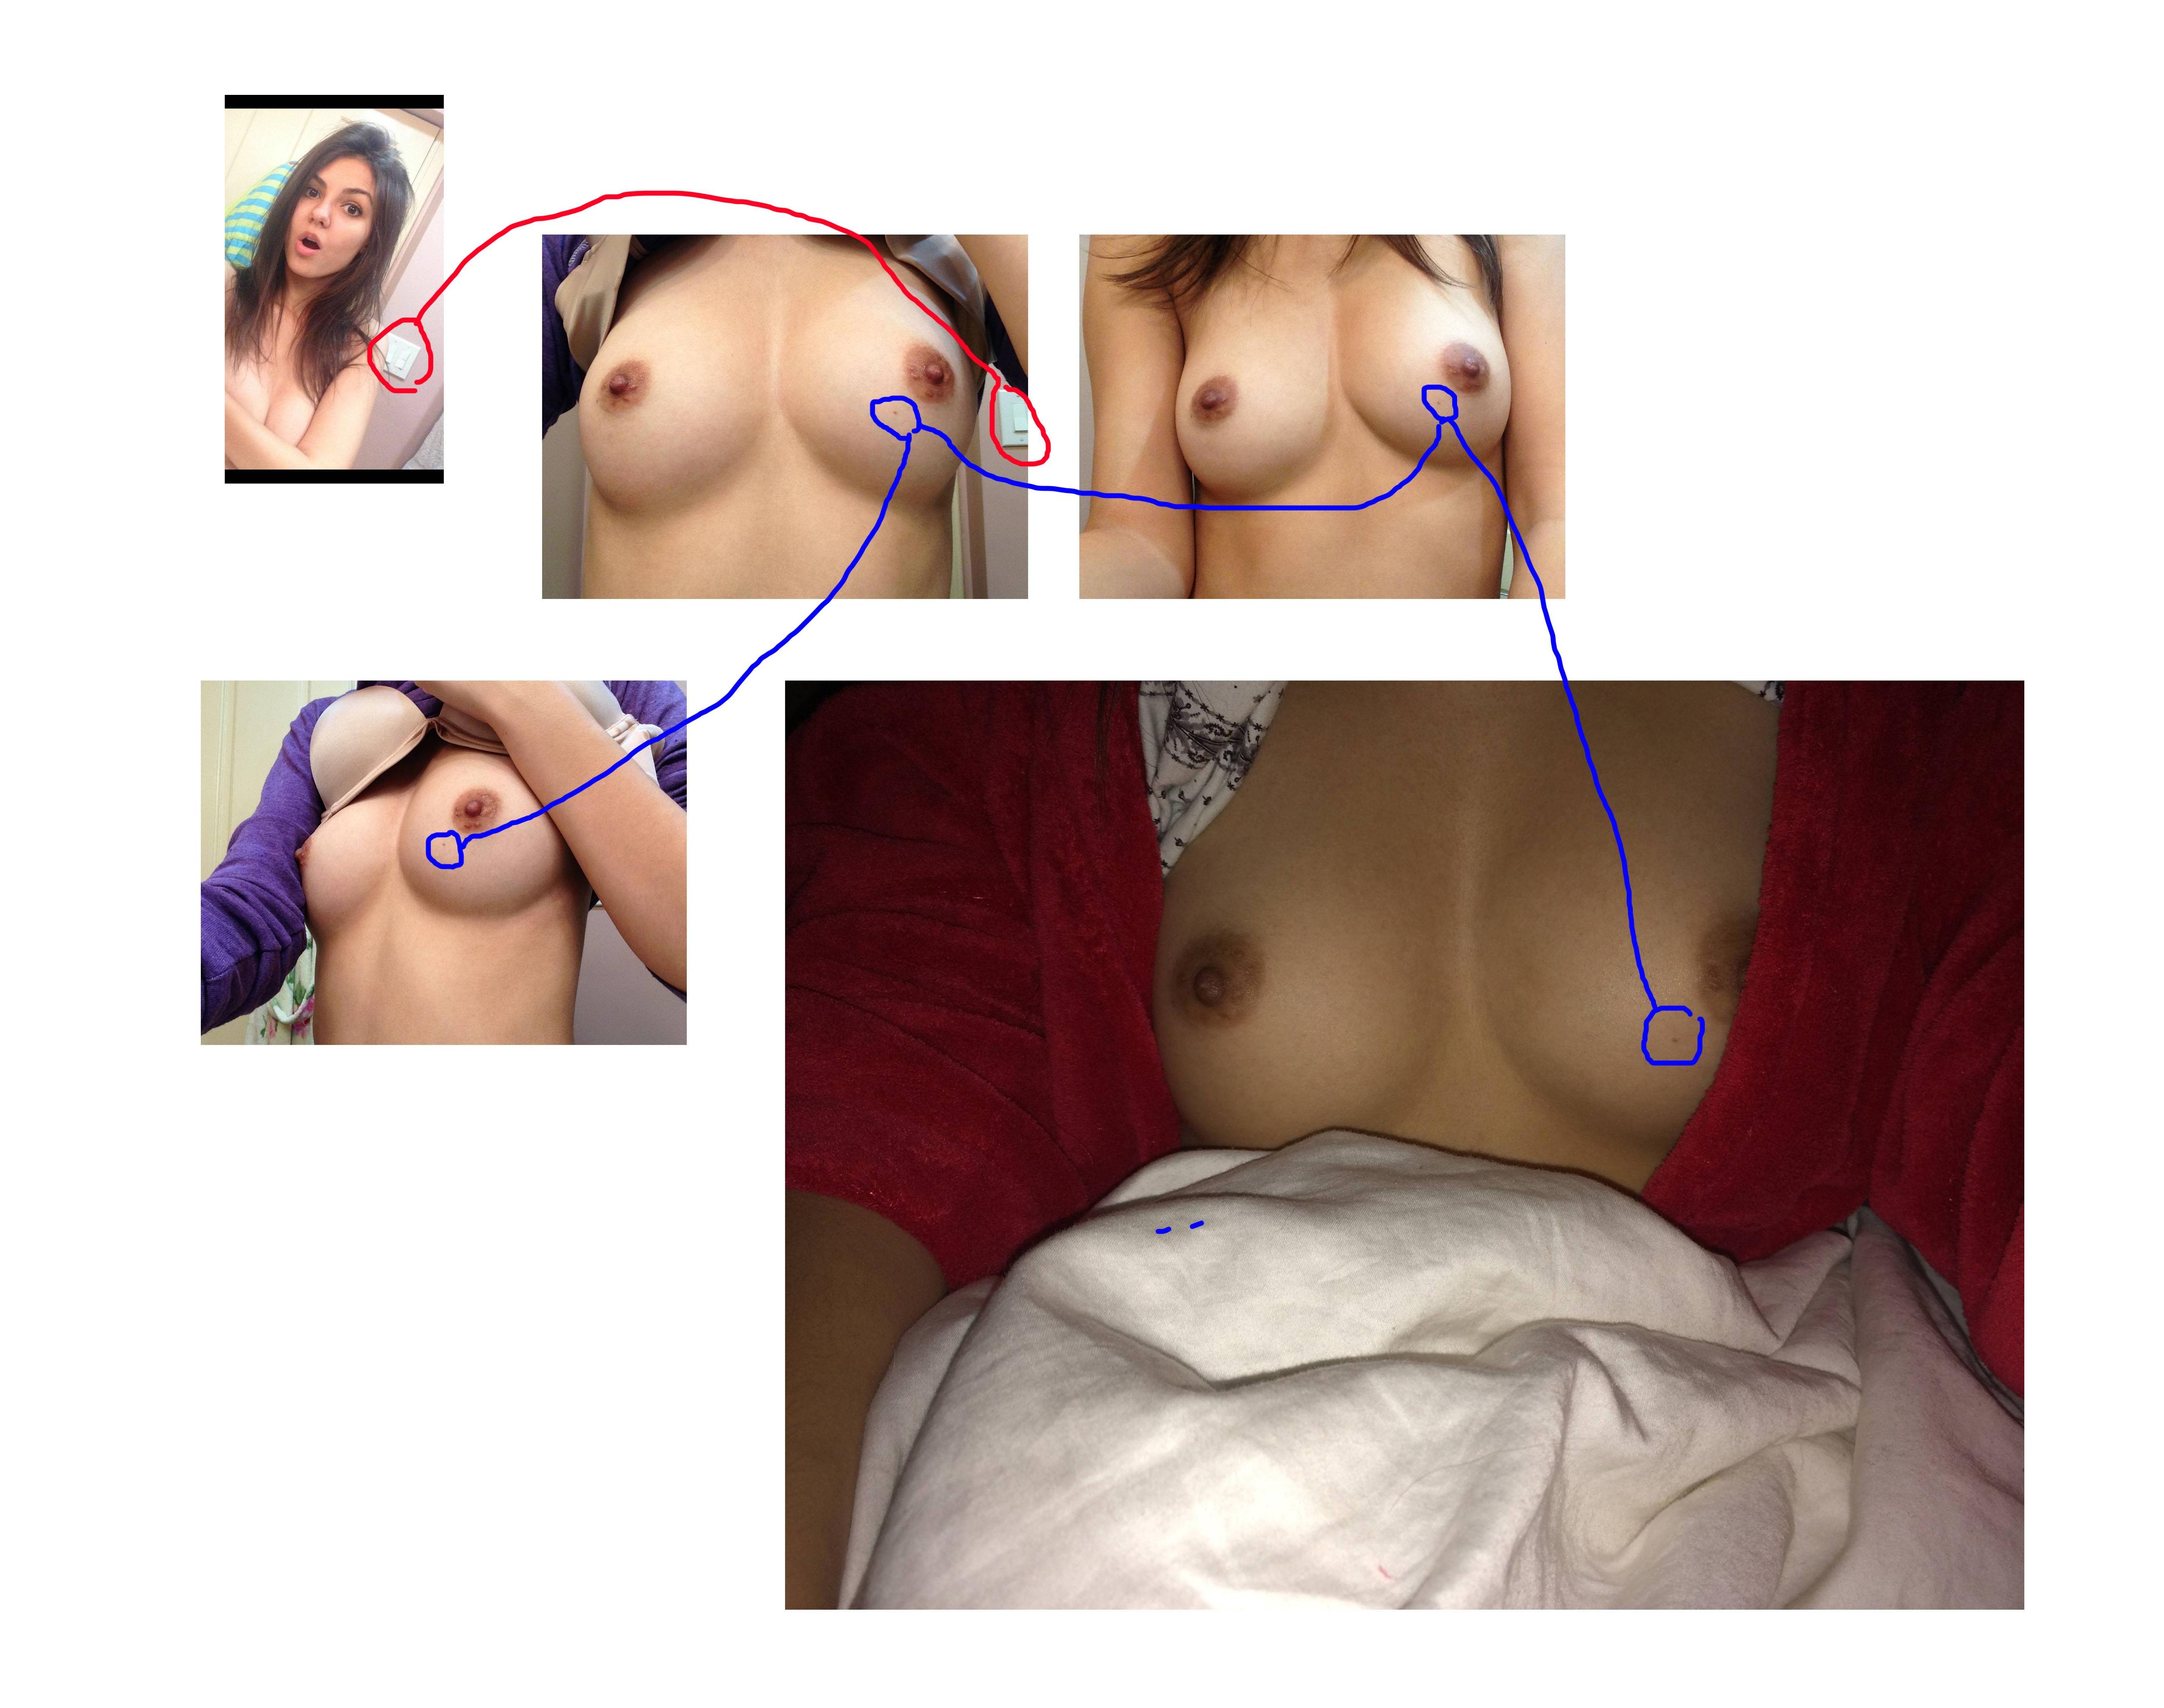 Victoria_Justice_leaked_private_nude_photo_hacked_personal_naked_pics_40x_M...